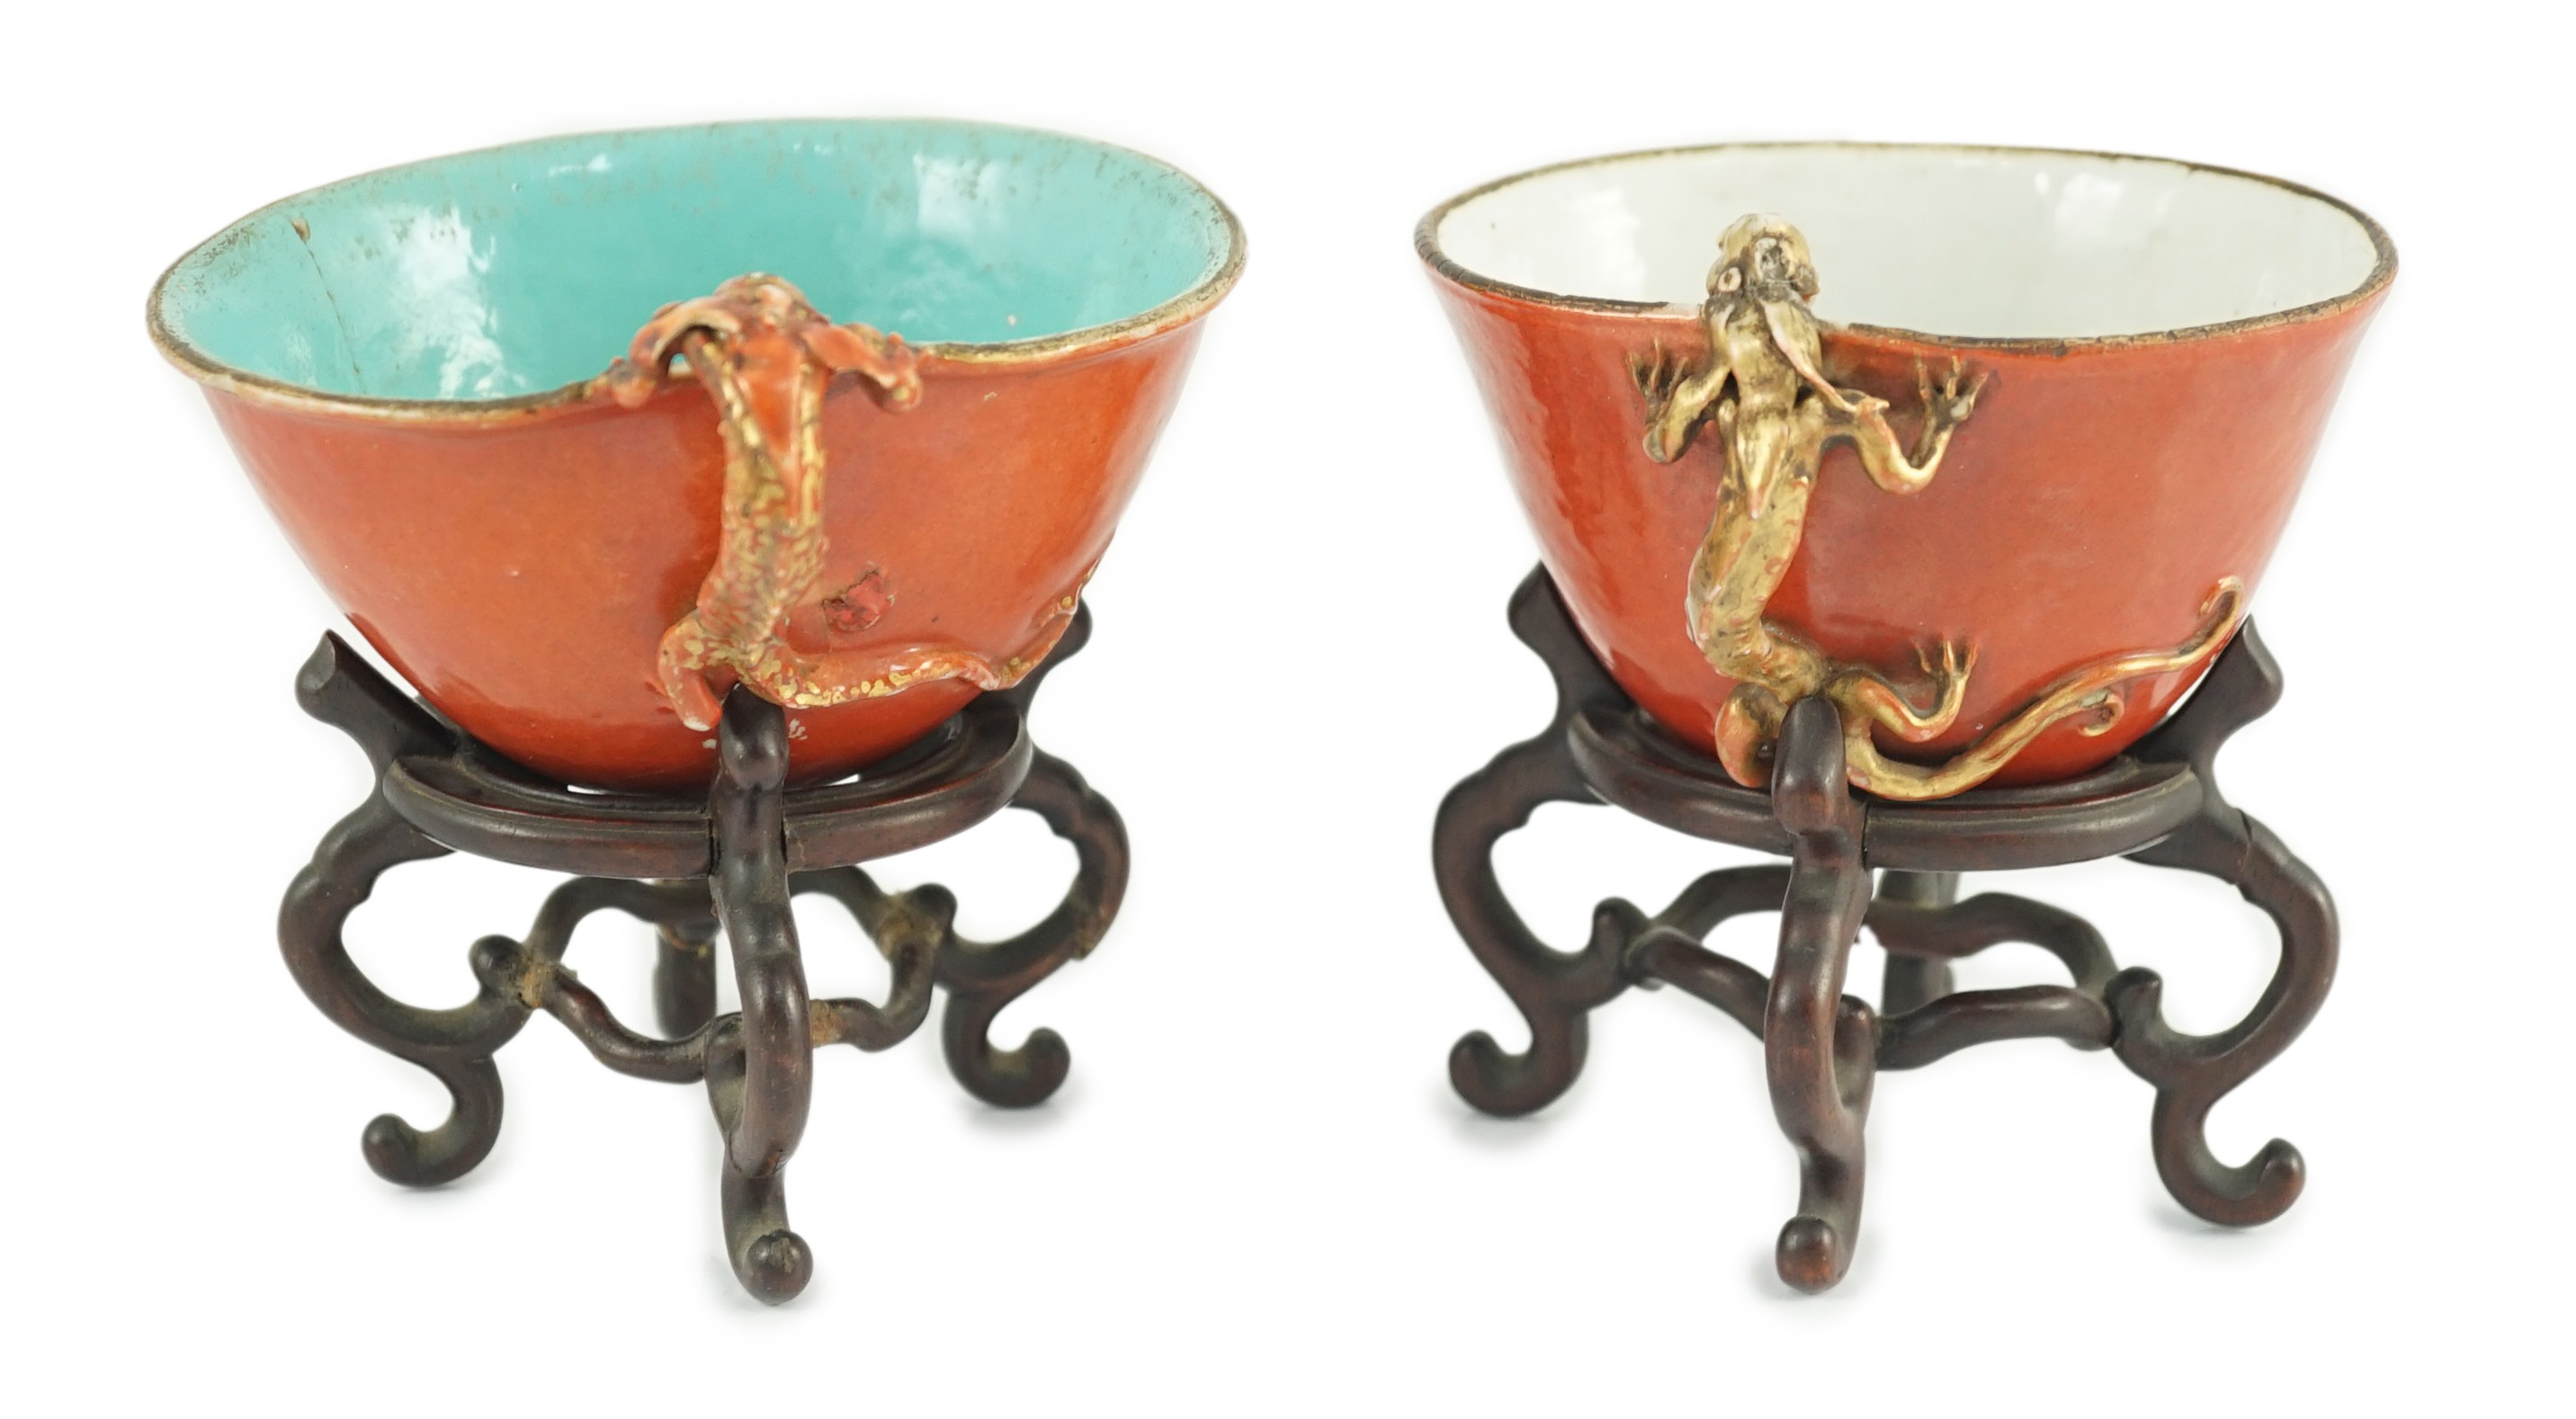 Two similar Chinese coral ground libation cups, late 18th/early 19th century, each of oval